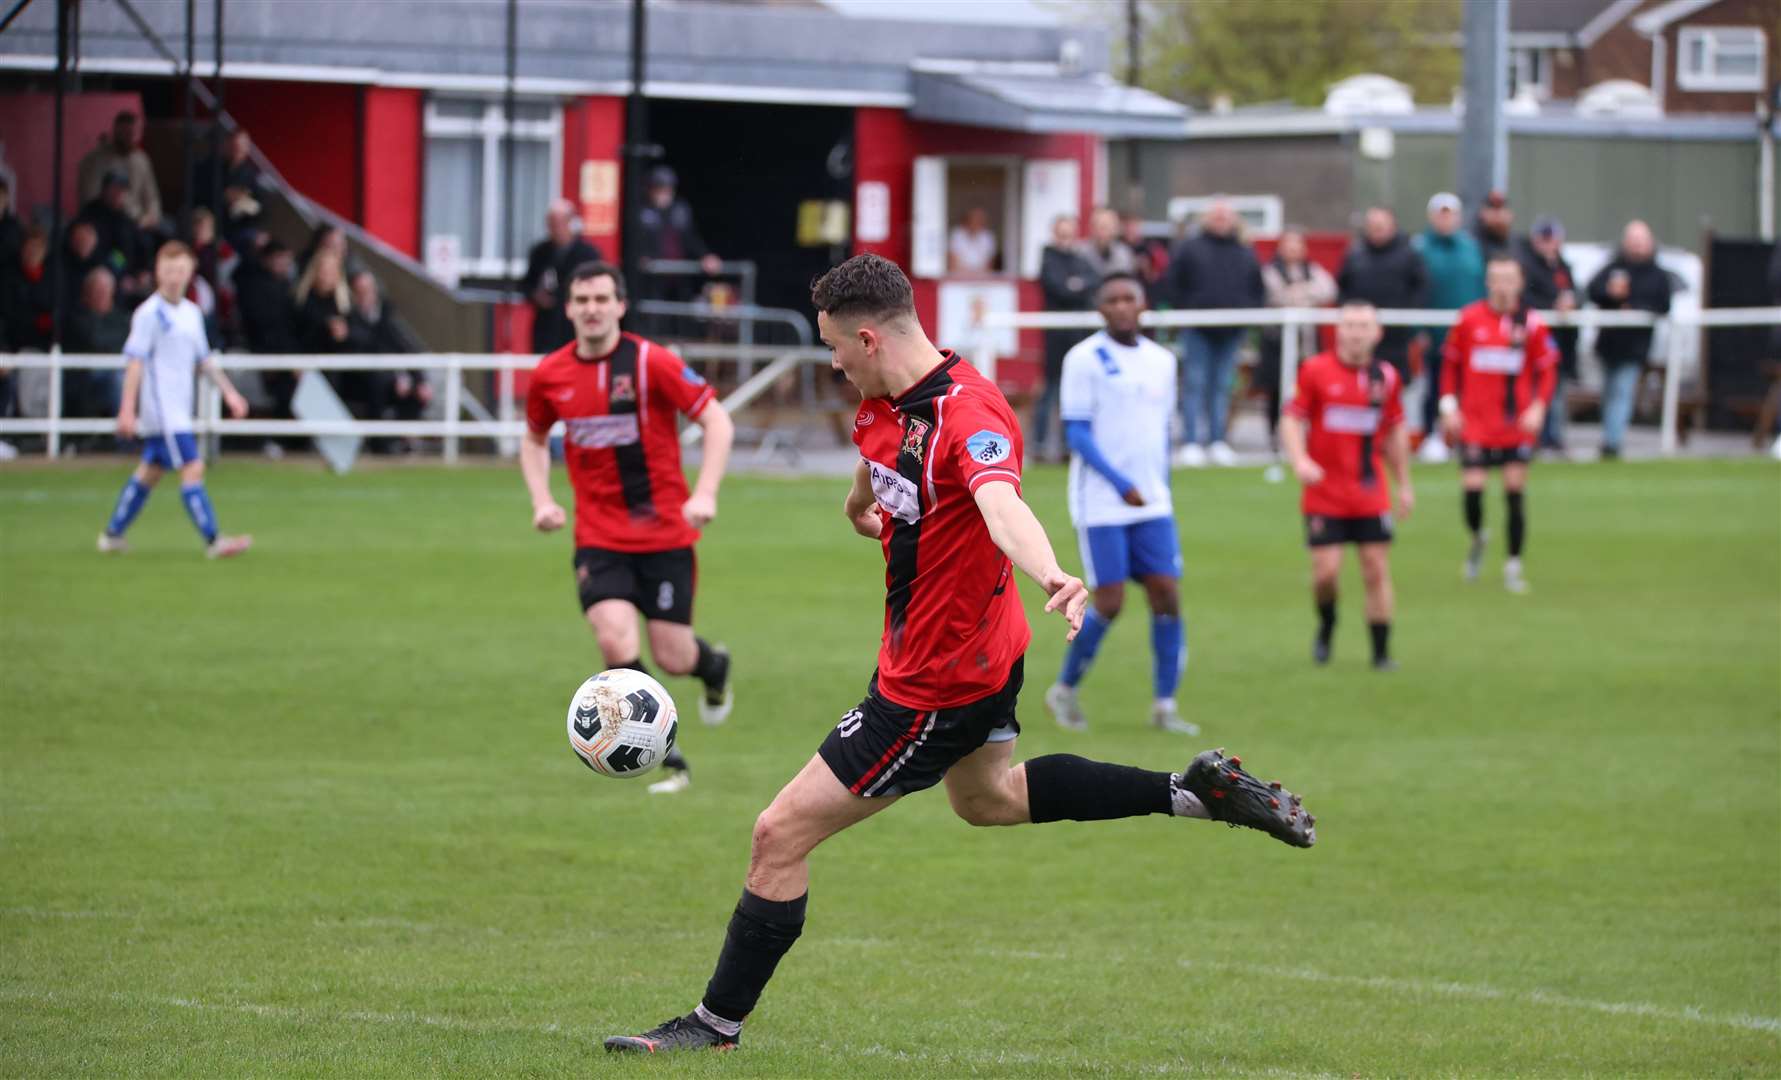 Rochester United head into the play-offs boosted by a new 25-year lease agreement on their Strood venue